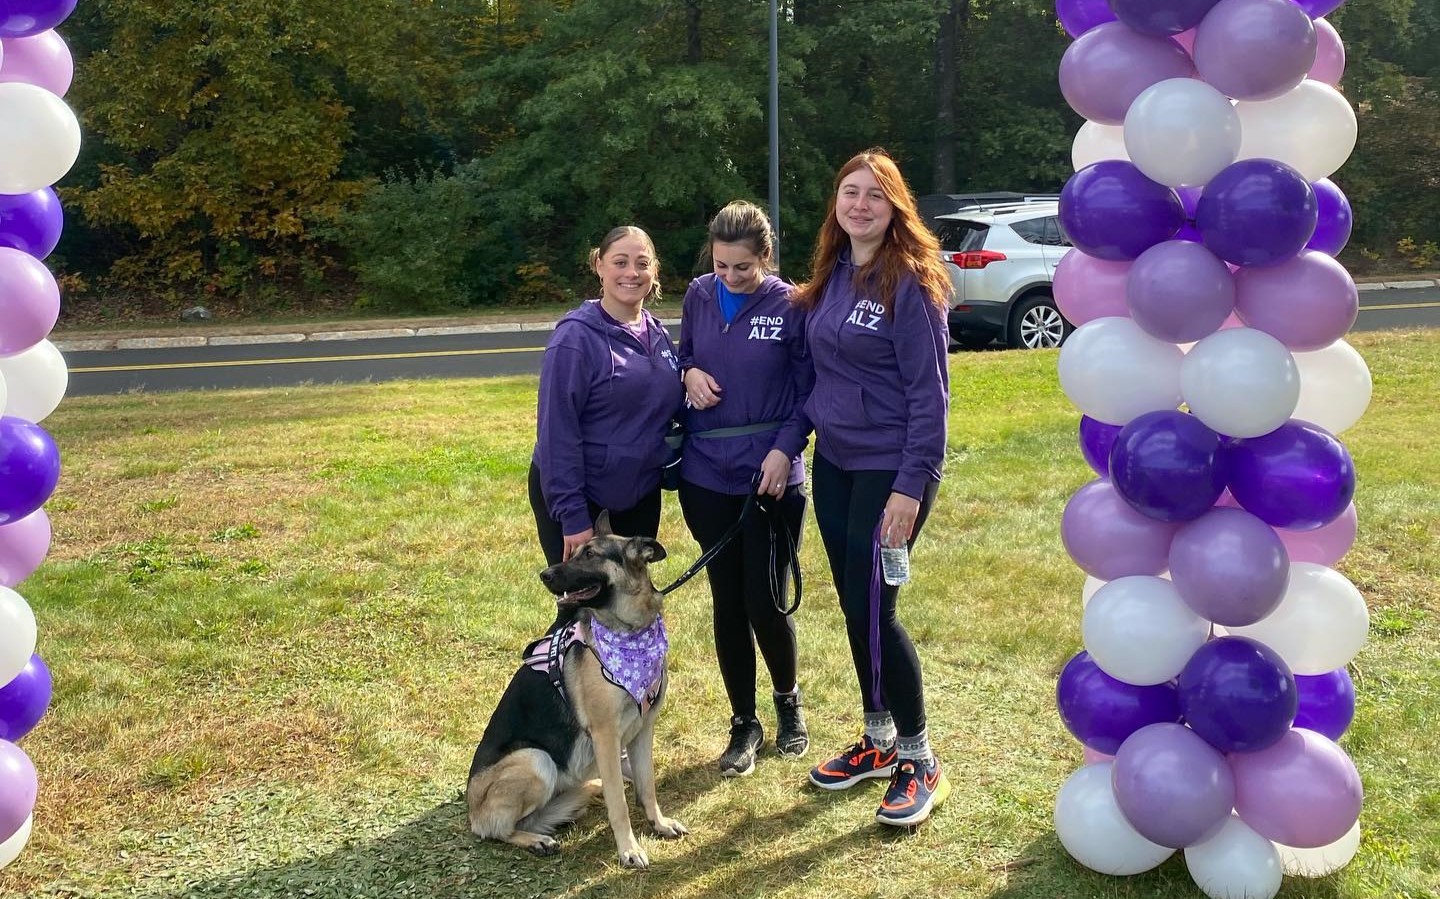 Walk to End Alzheimer’s at Holyoke Community College